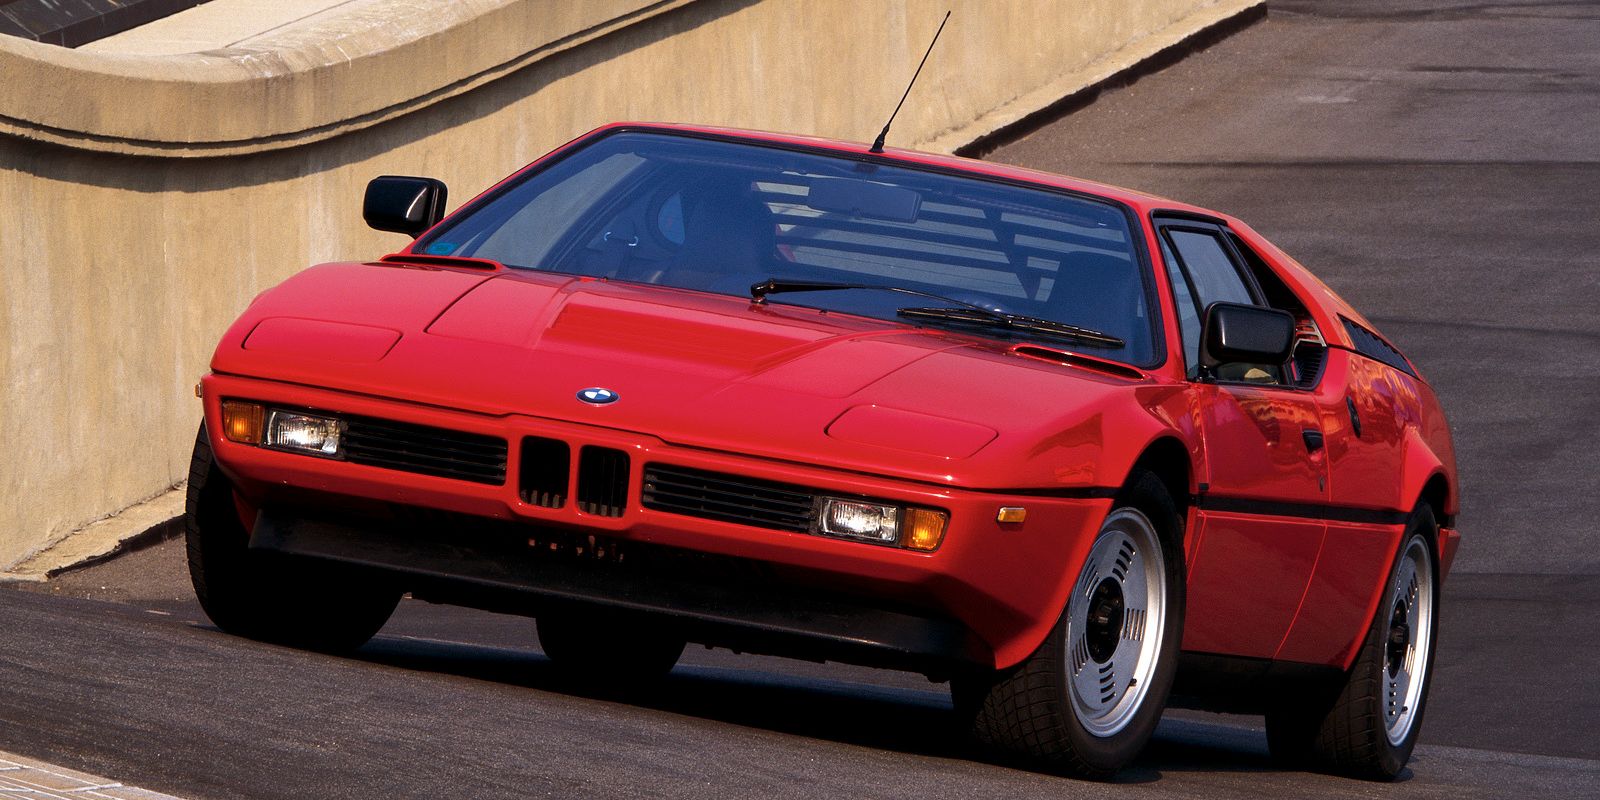 5 Famous Kit Cars With Supercar-Rivaling Performance